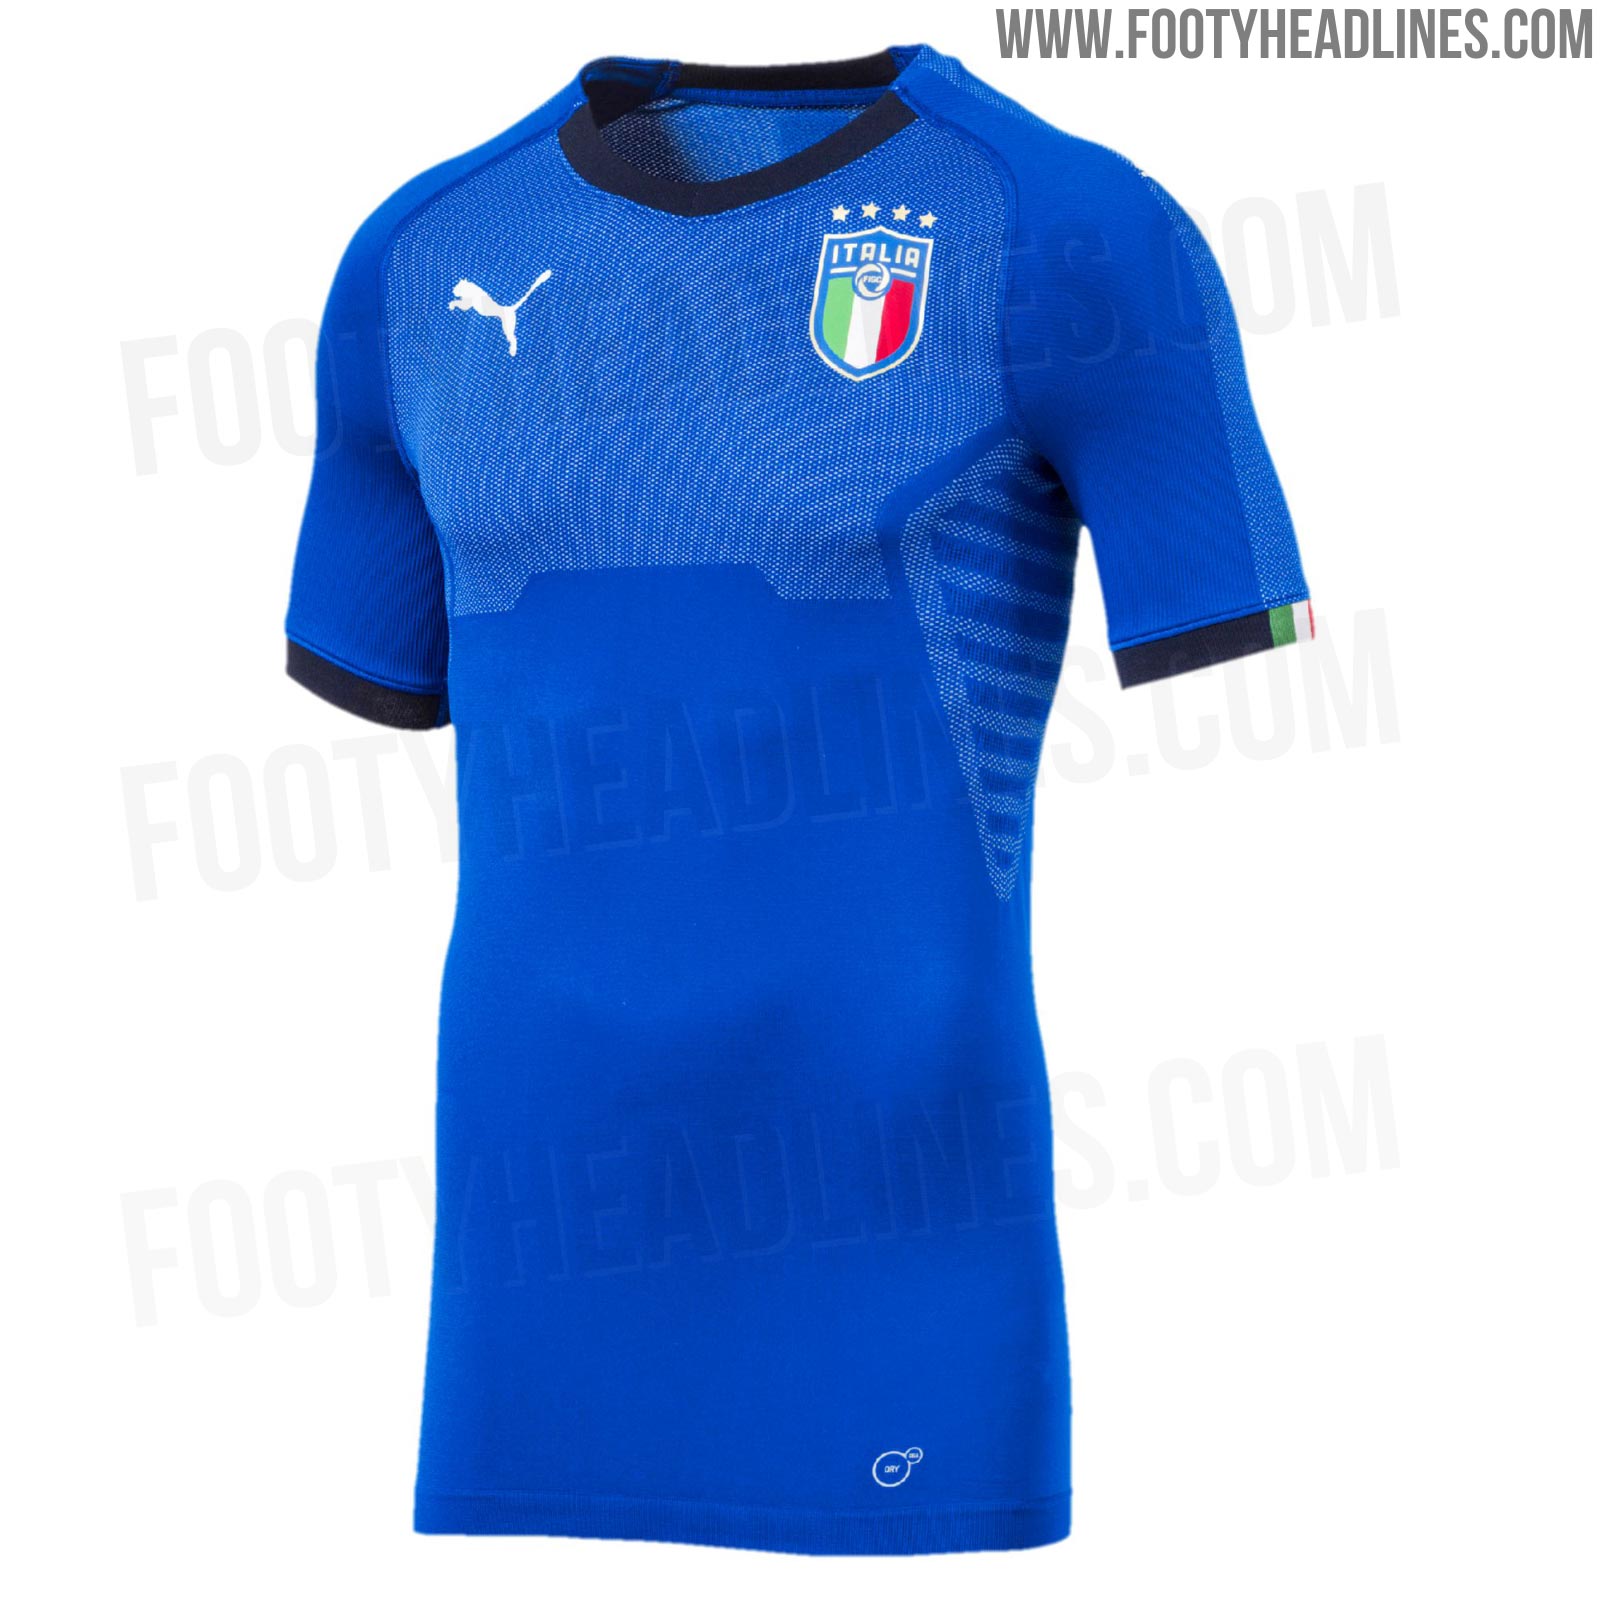 italy-2018-world-cup-home-kit-2.jpg